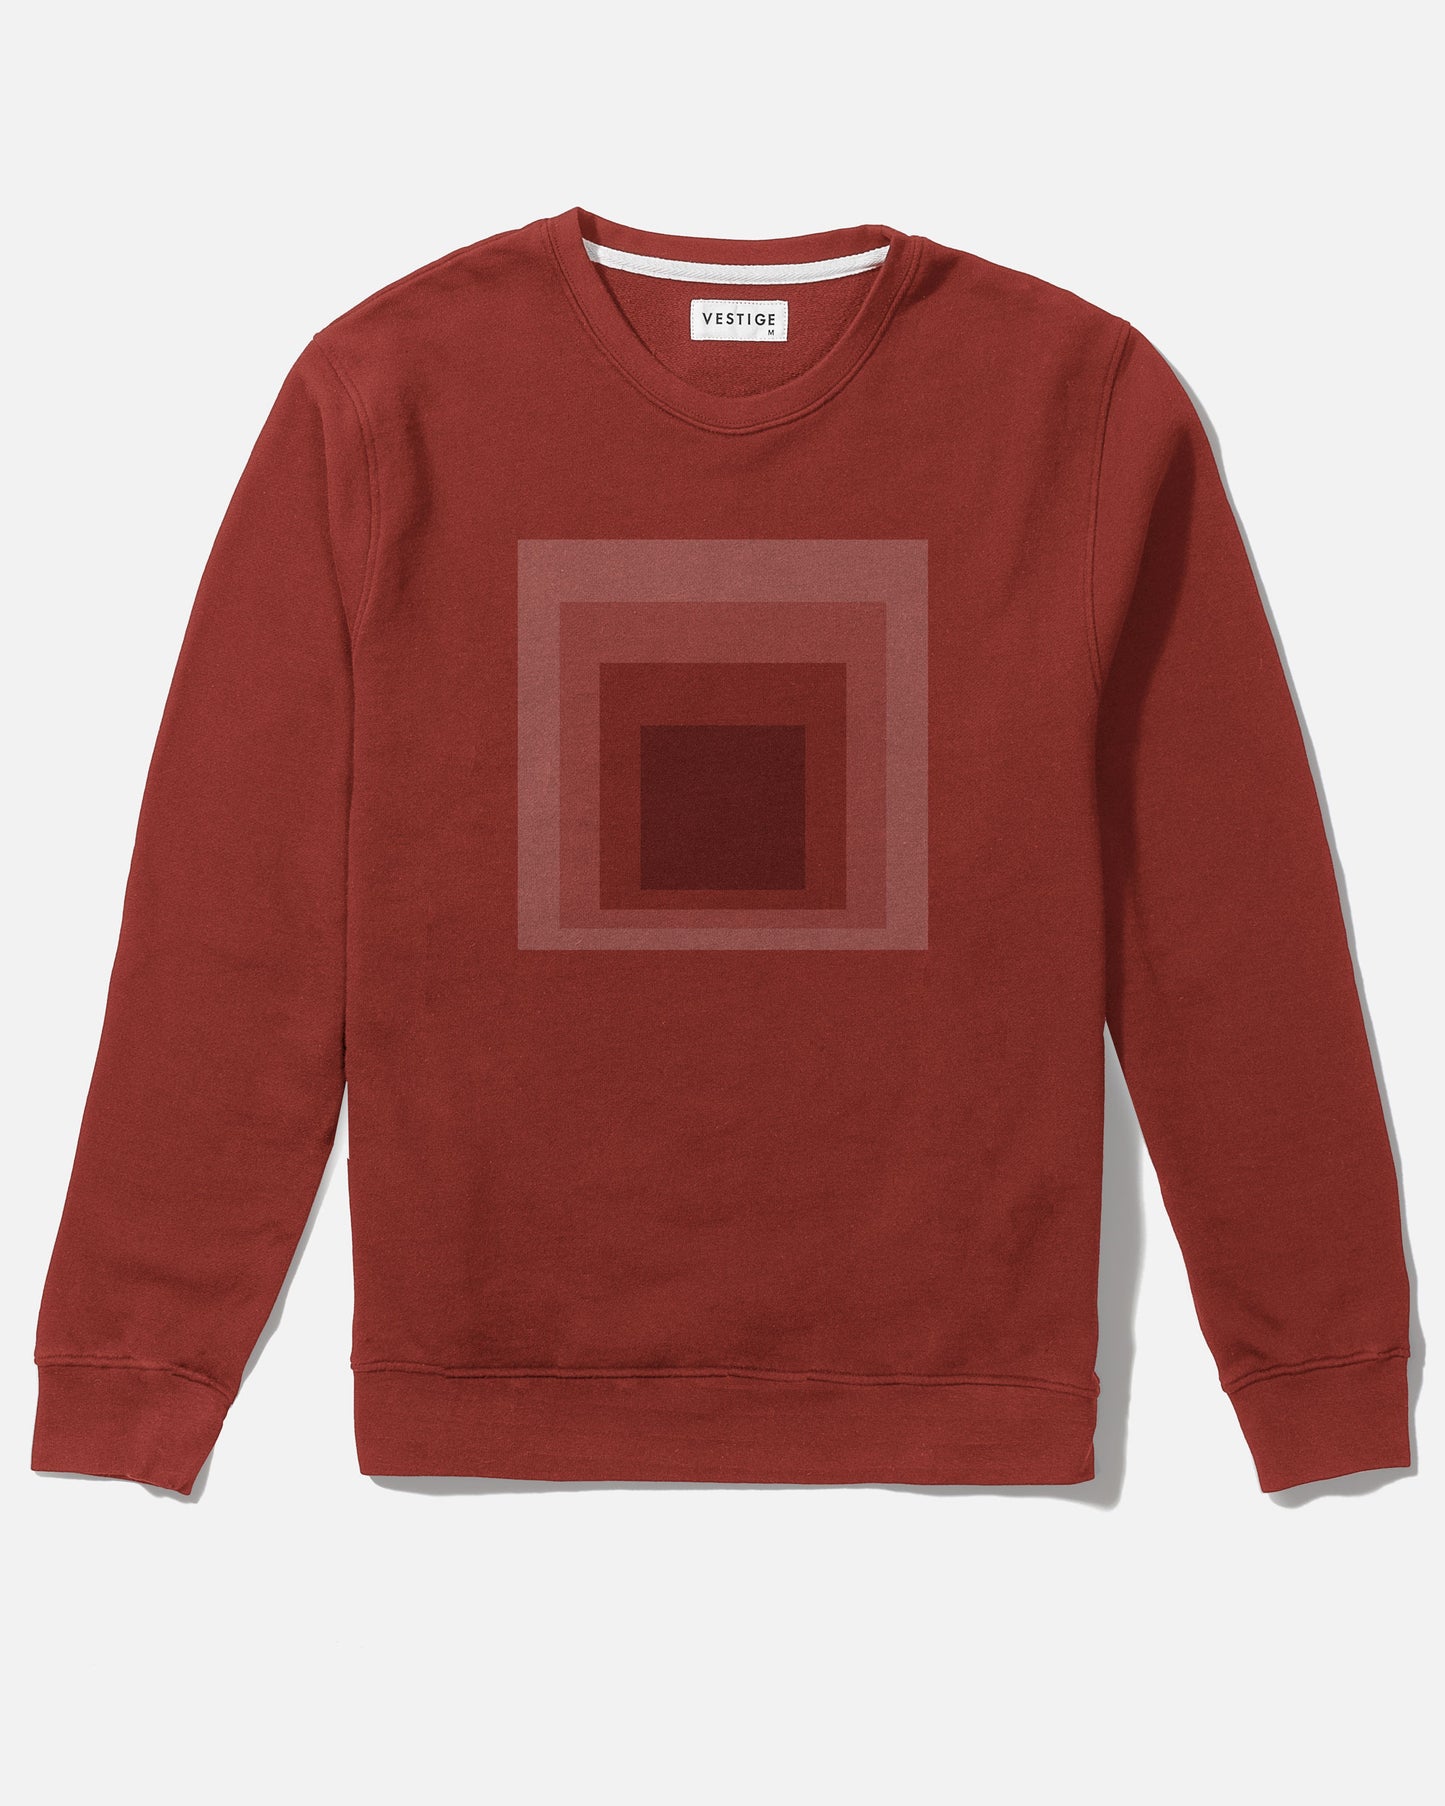 Homage to the Square Sweatshirt, Red